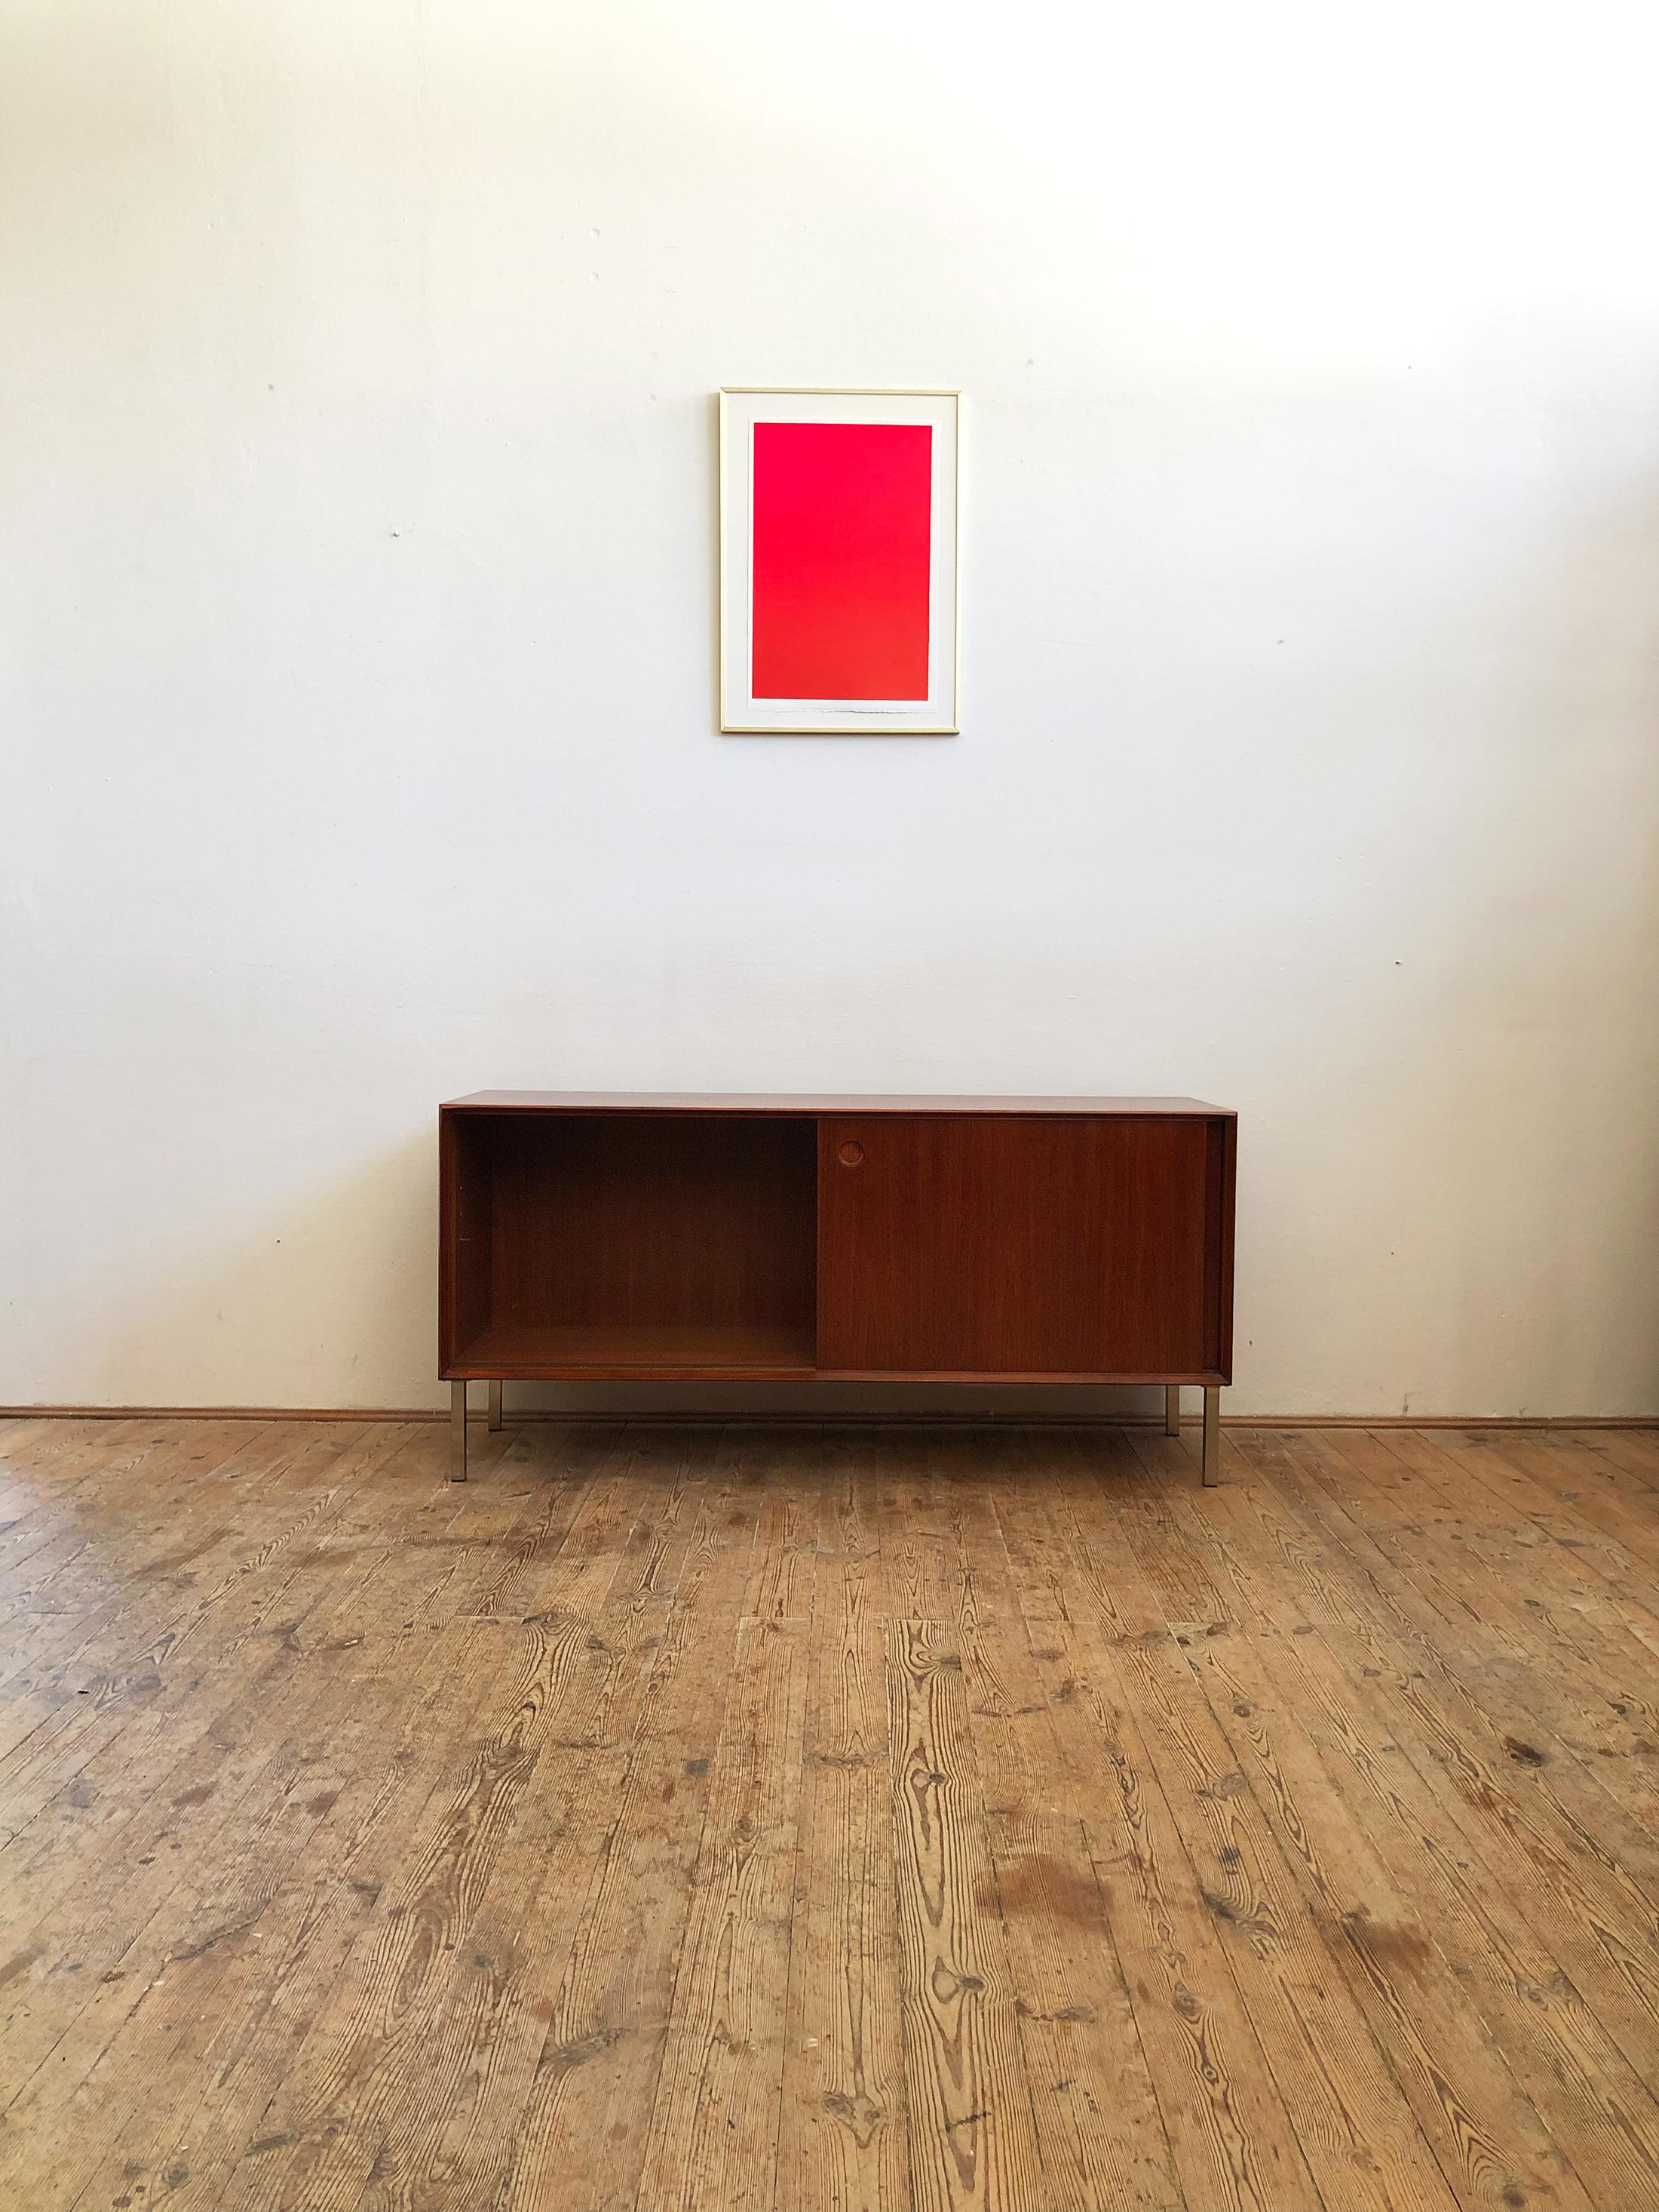 This Minimalist midcentury teak sideboard was designed by Walter Wirz and manufactured in Germany.

The sideboard is made of Mahagoni-colored teak veneer on chrome feet which were added later on and shows beautiful details, especially the handles